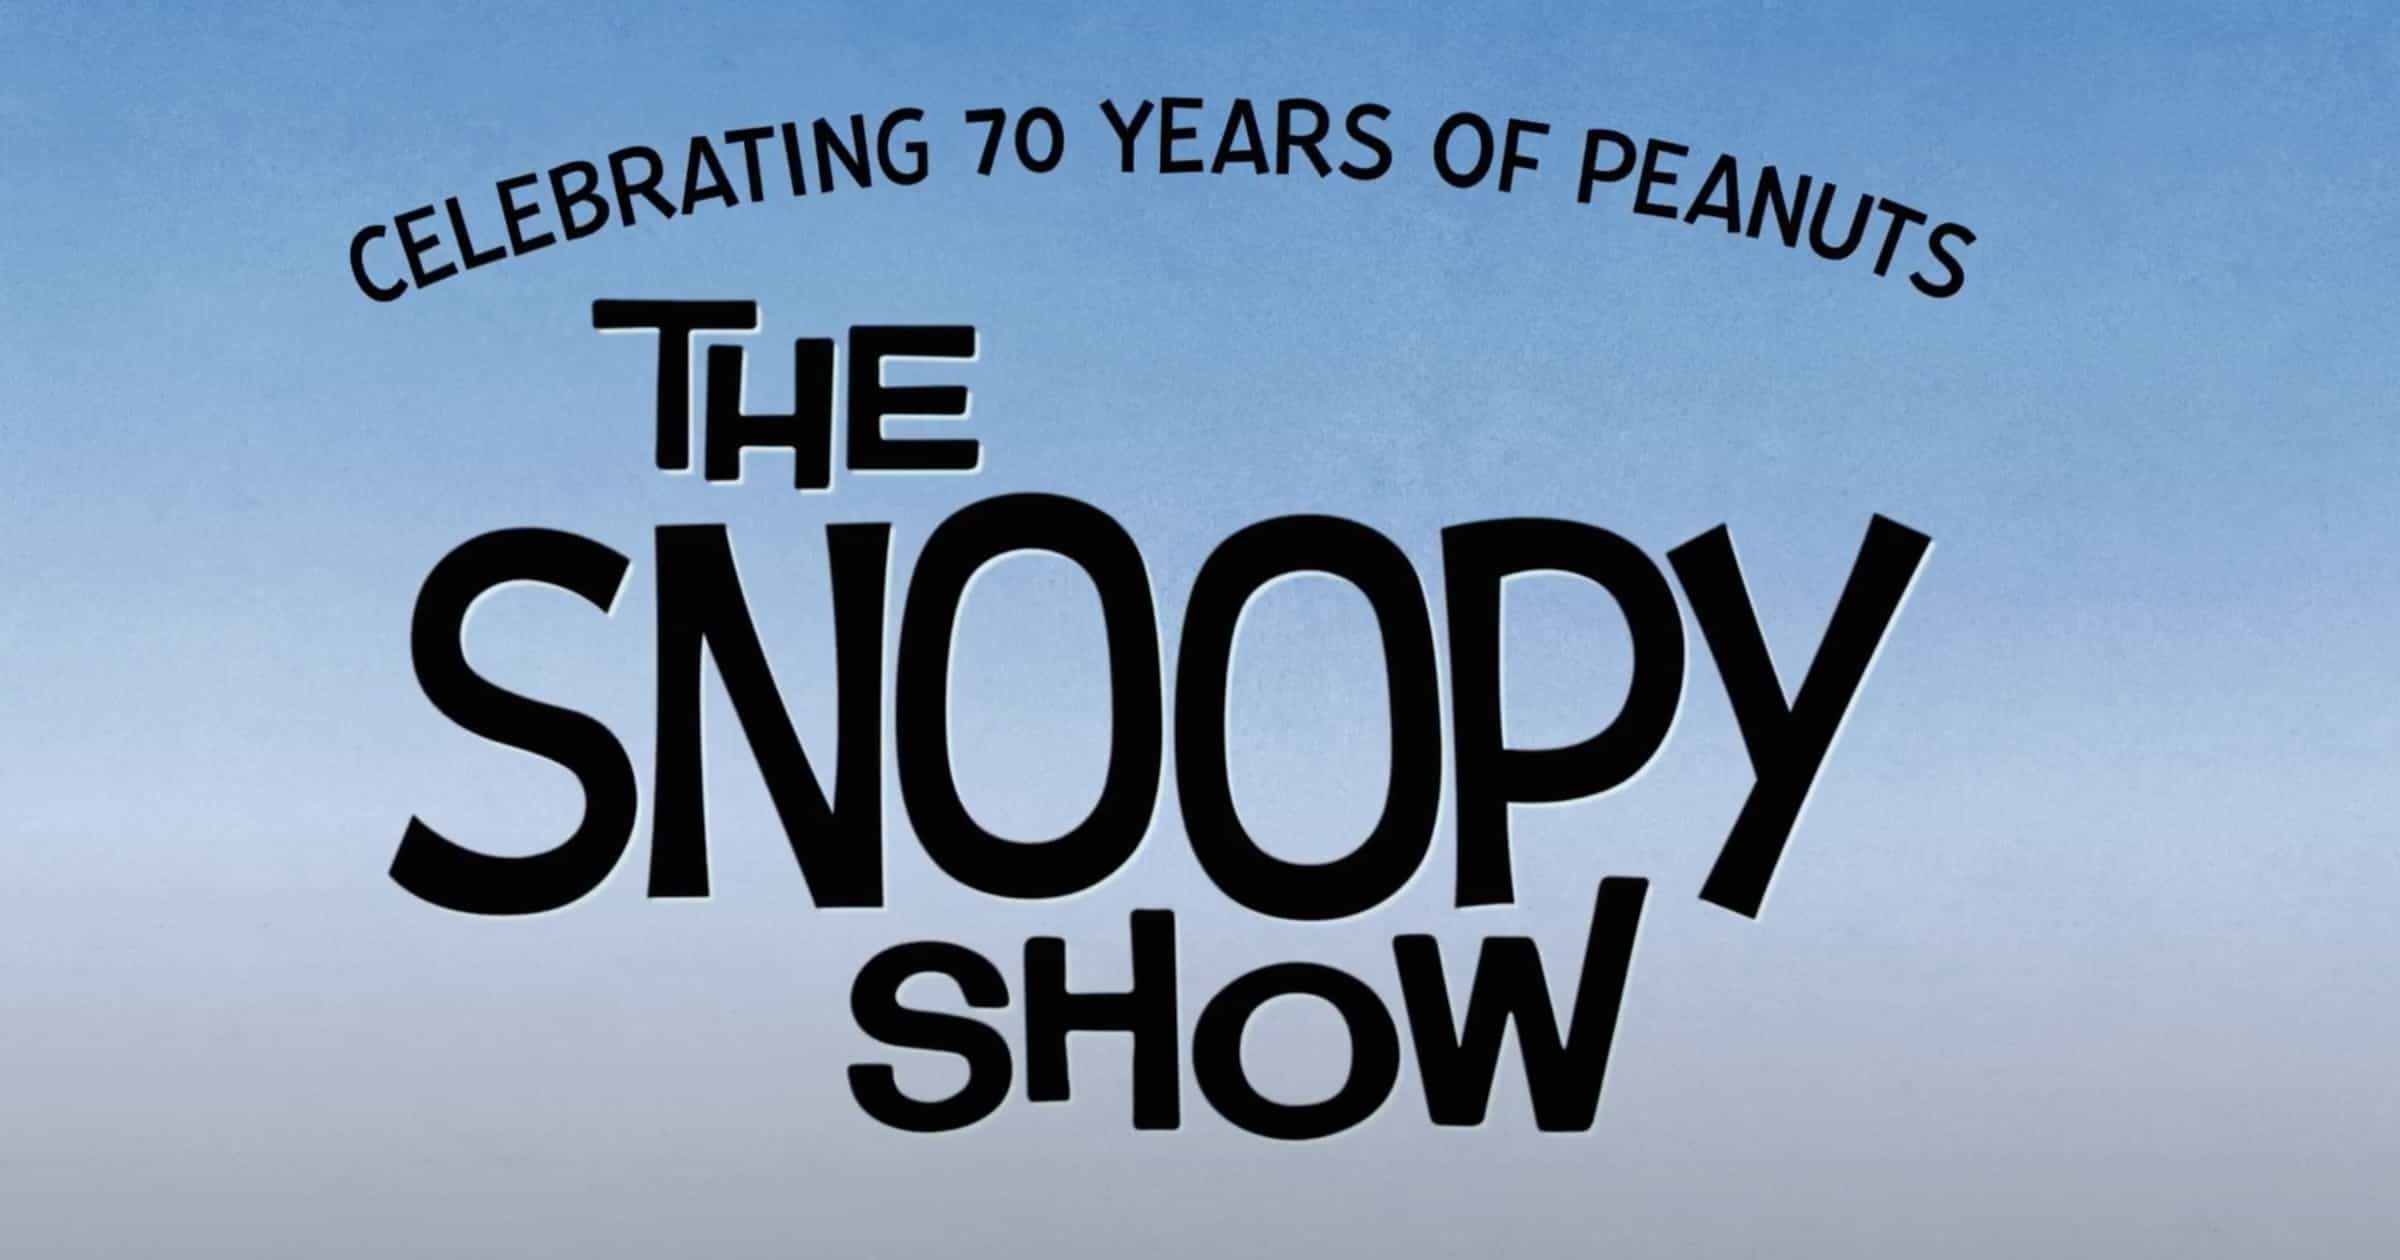 Jean Schulz Discusses Peanuts Partnership With Apple TV+ For The Snoopy Show